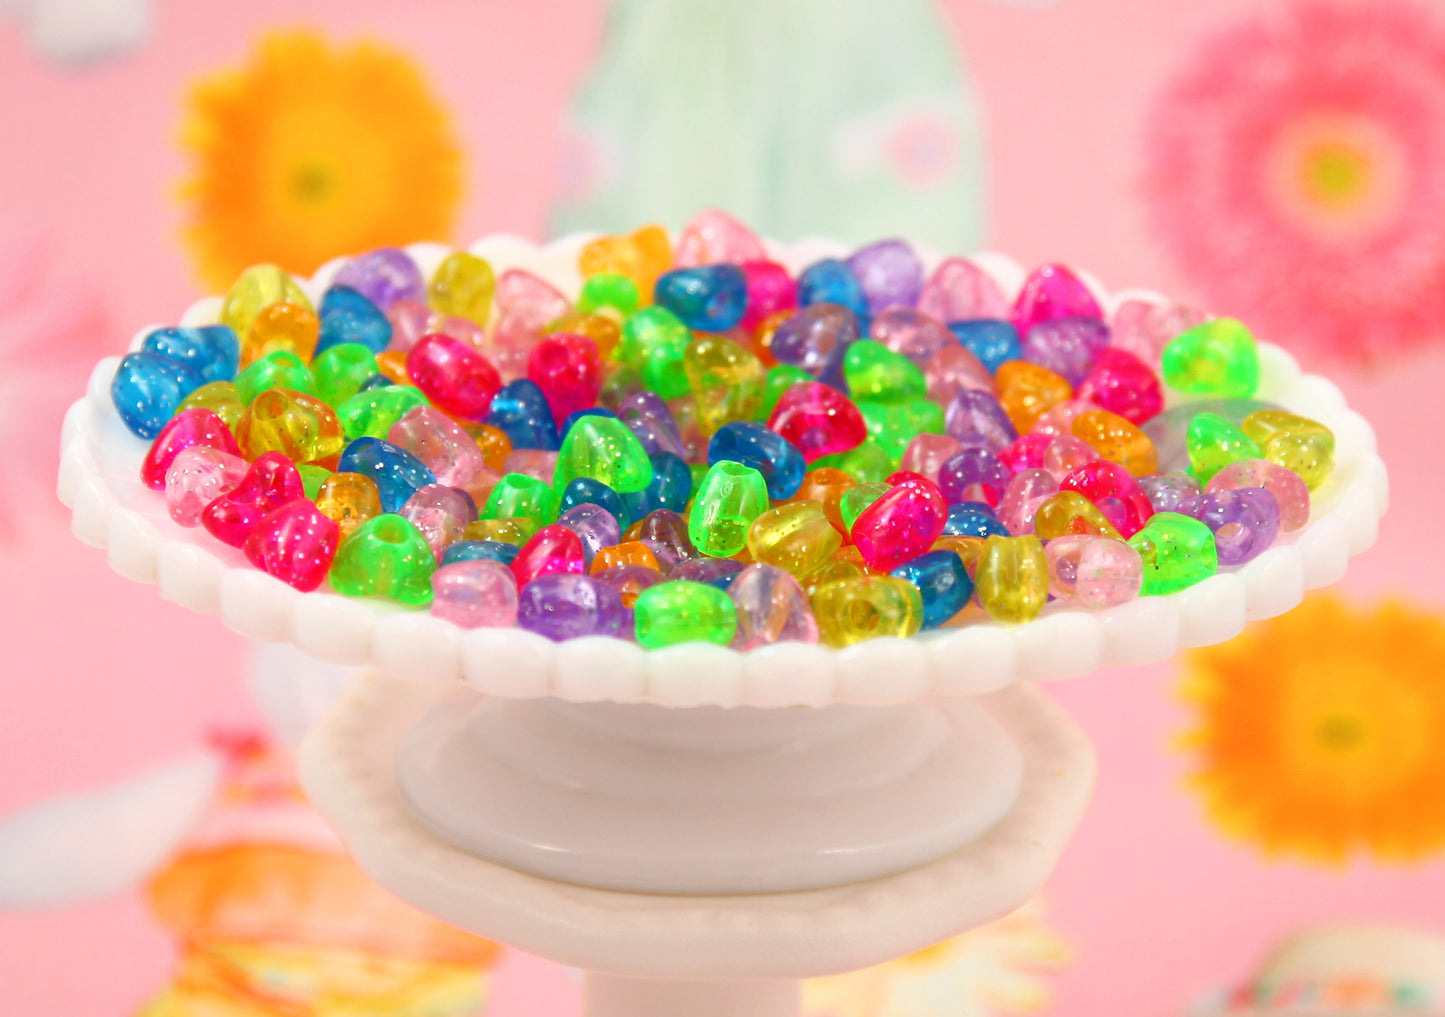 Colorful Plastic Beads - 9mm Vibrant Glitter Heart Bead Resin or Acrylic Beads, mixed color, small size beads - 150 pc set